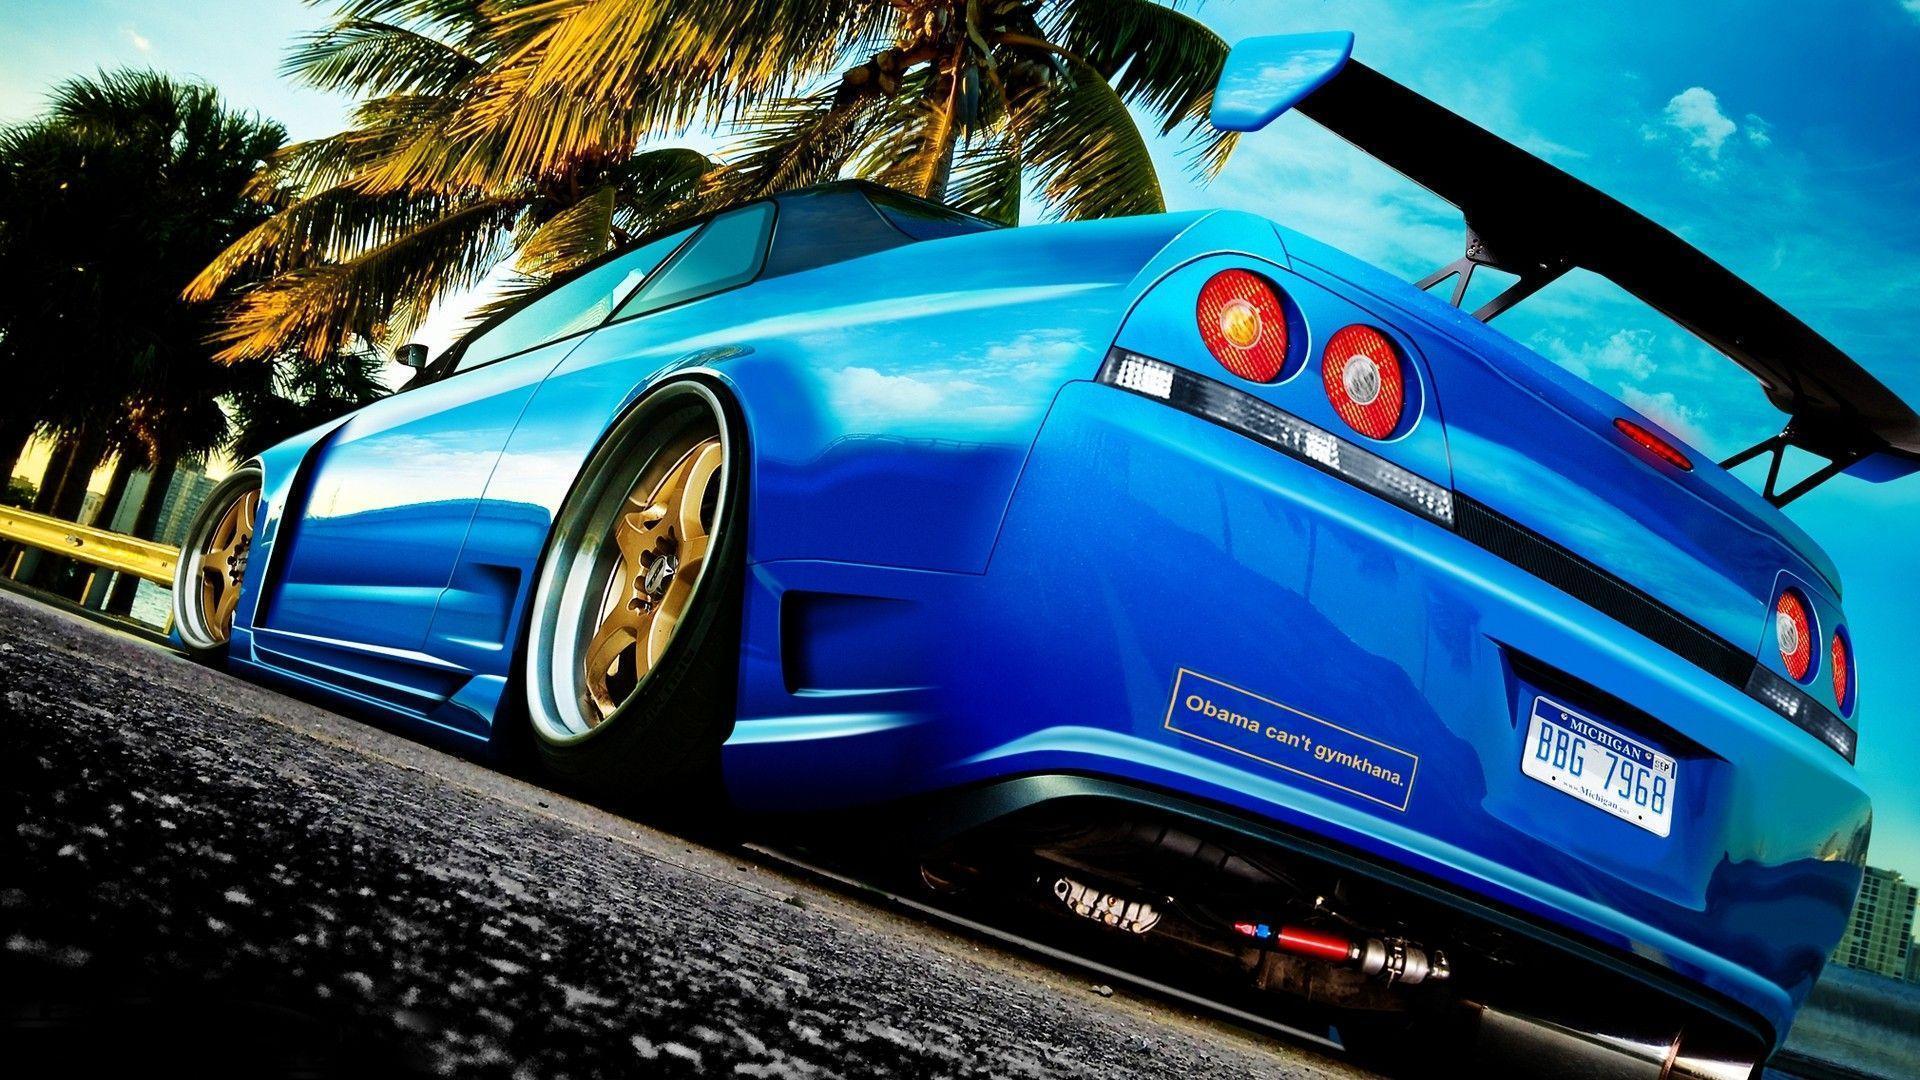 Blue Cars Wallpaper. cars wall papers. Skyline r33